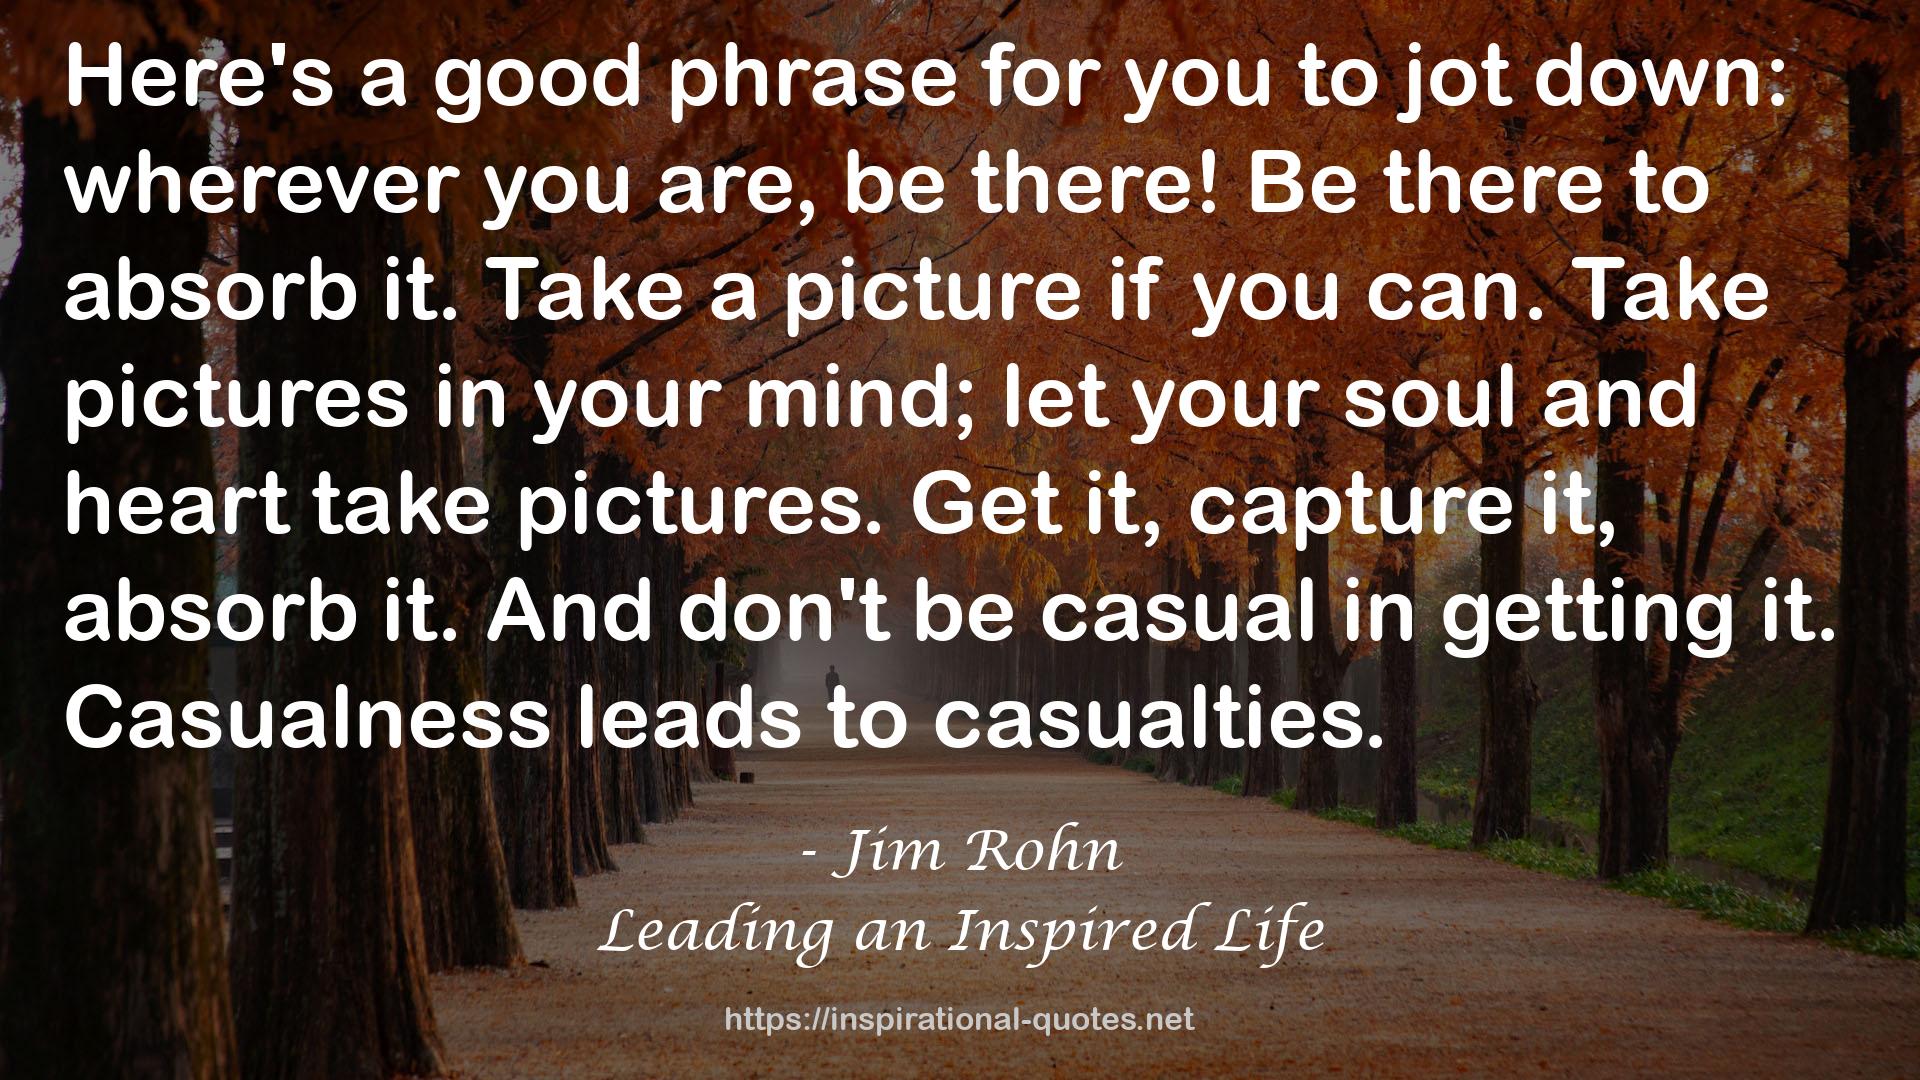 Leading an Inspired Life QUOTES